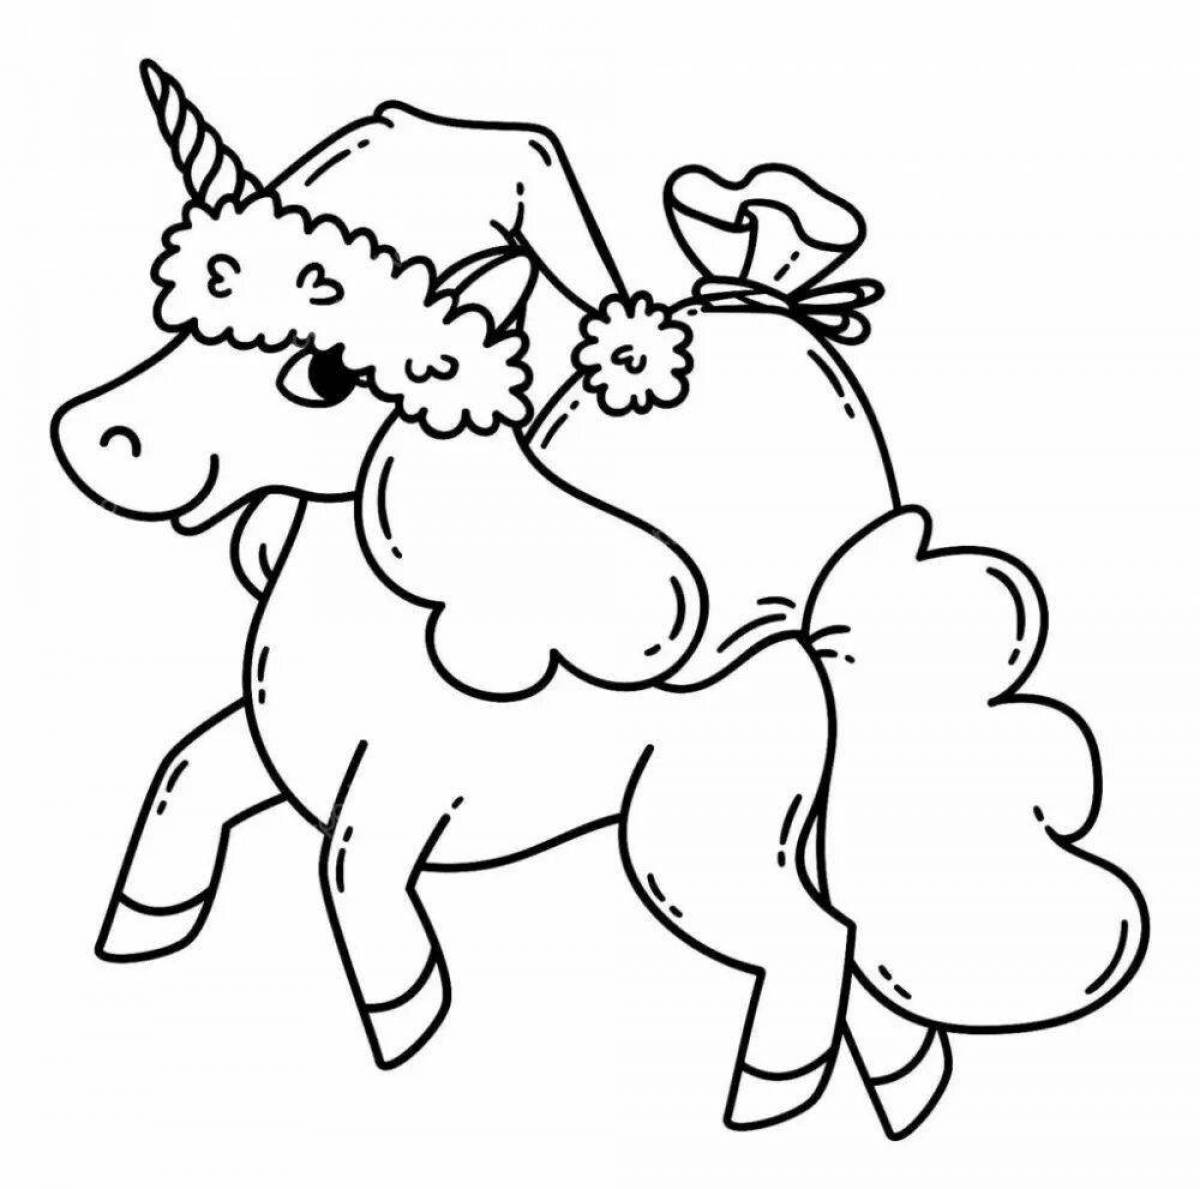 Glorious New Year's unicorn coloring page